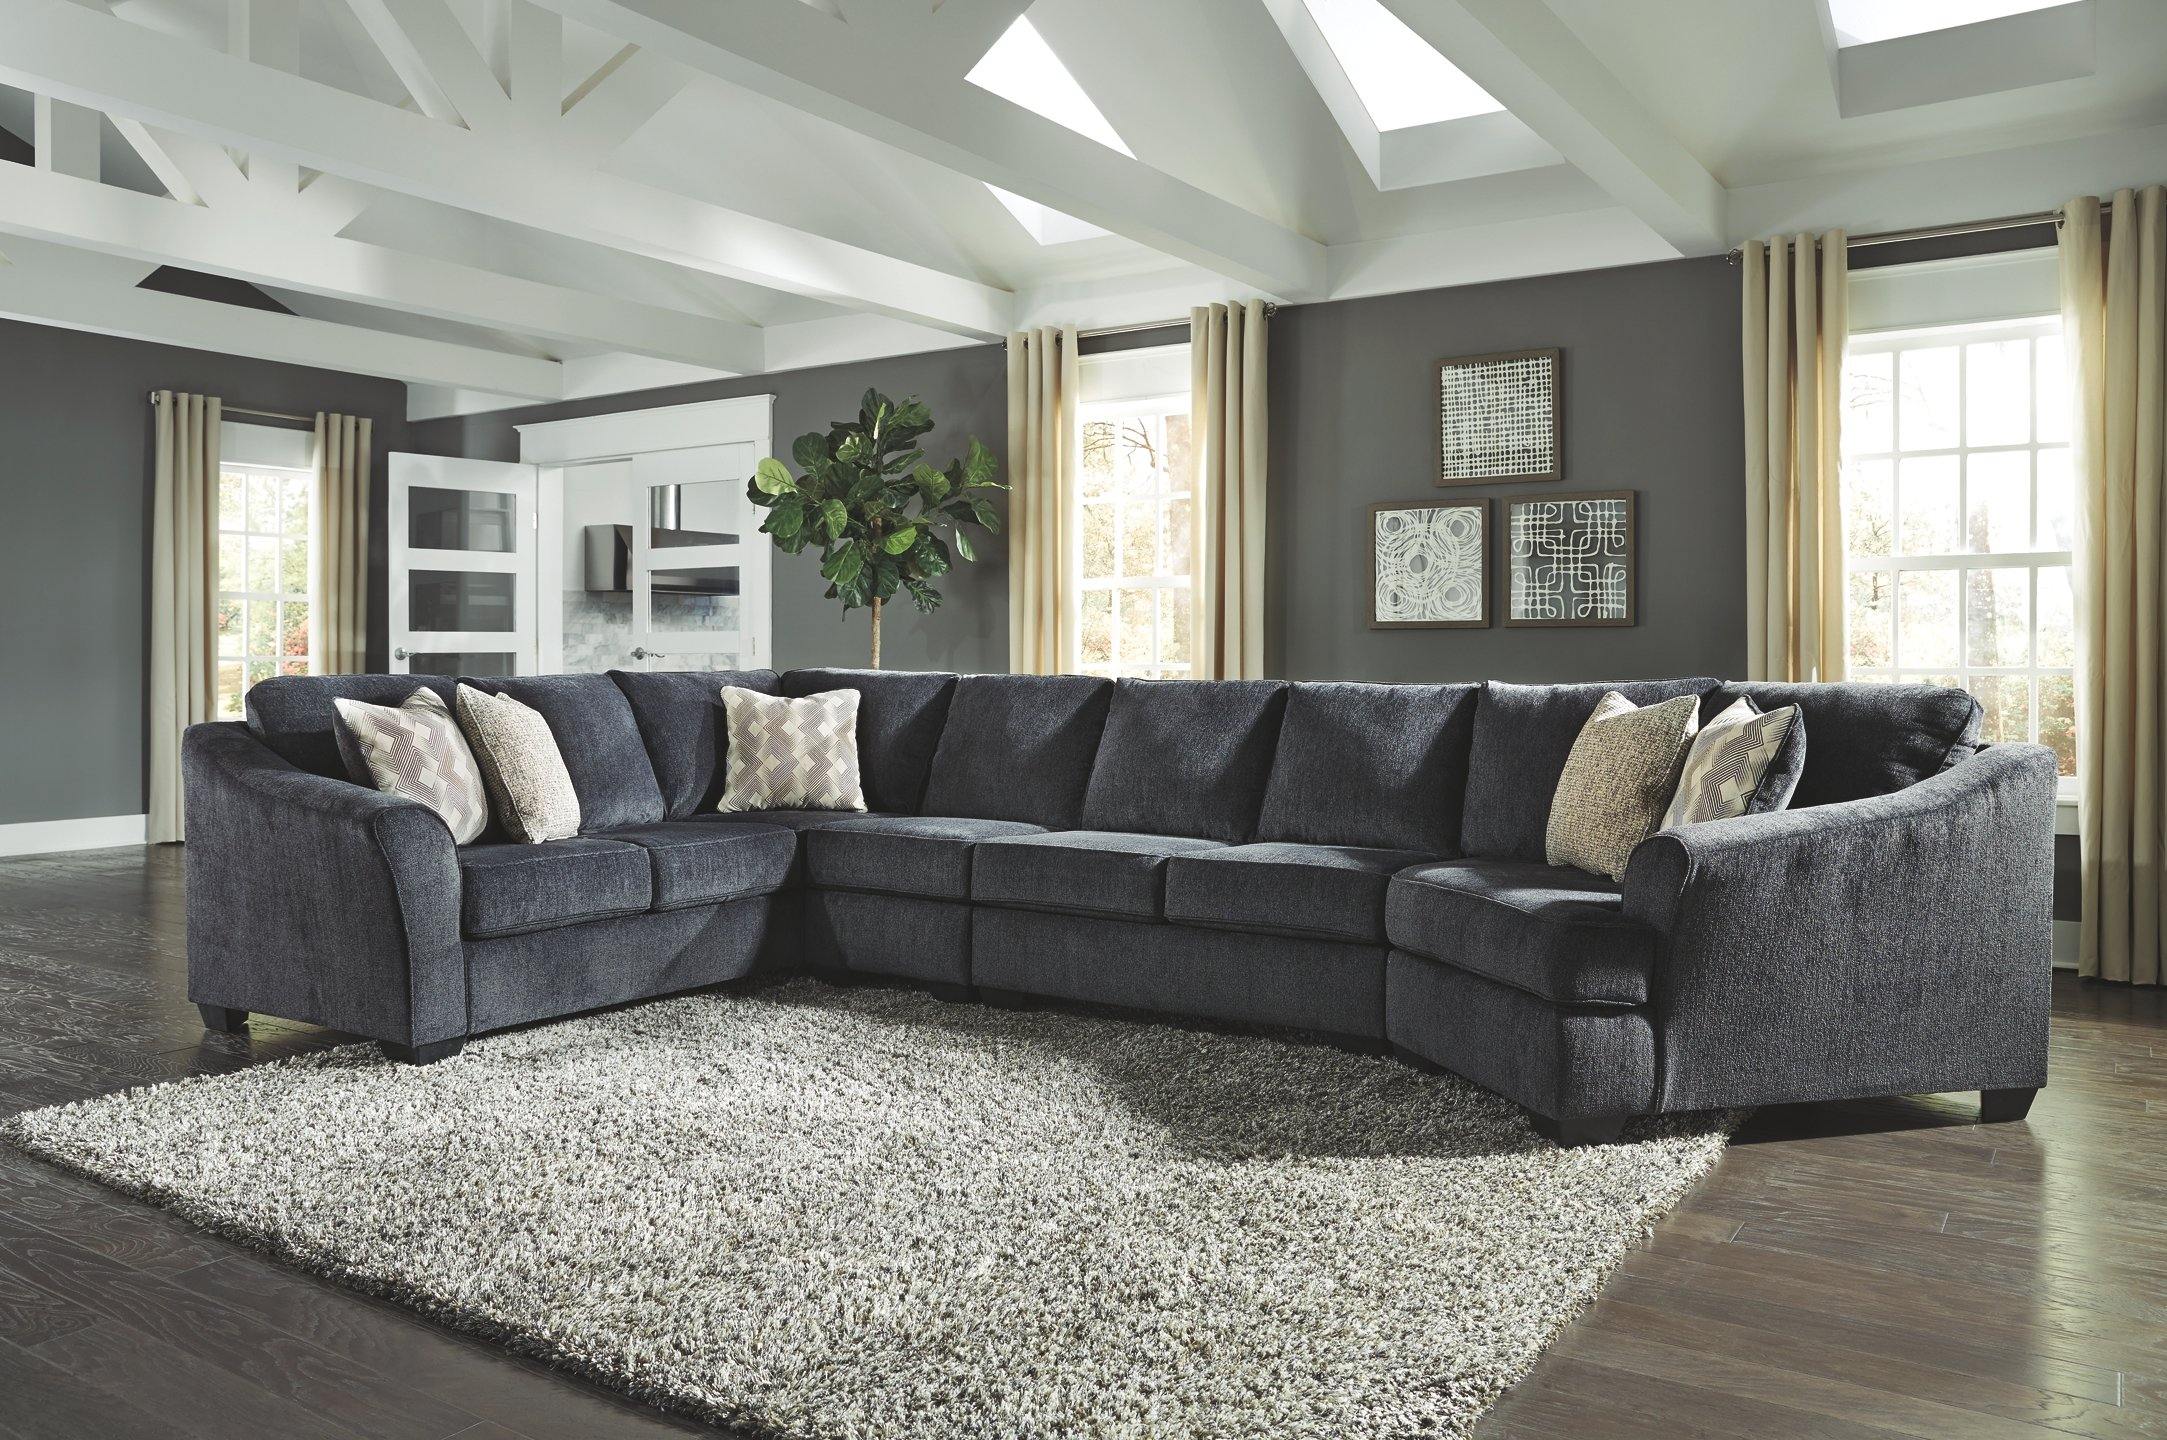 Eltmann 4Piece Sectional with Cuddler 41303S2 Stationary Sectionals By ashley - sofafair.com